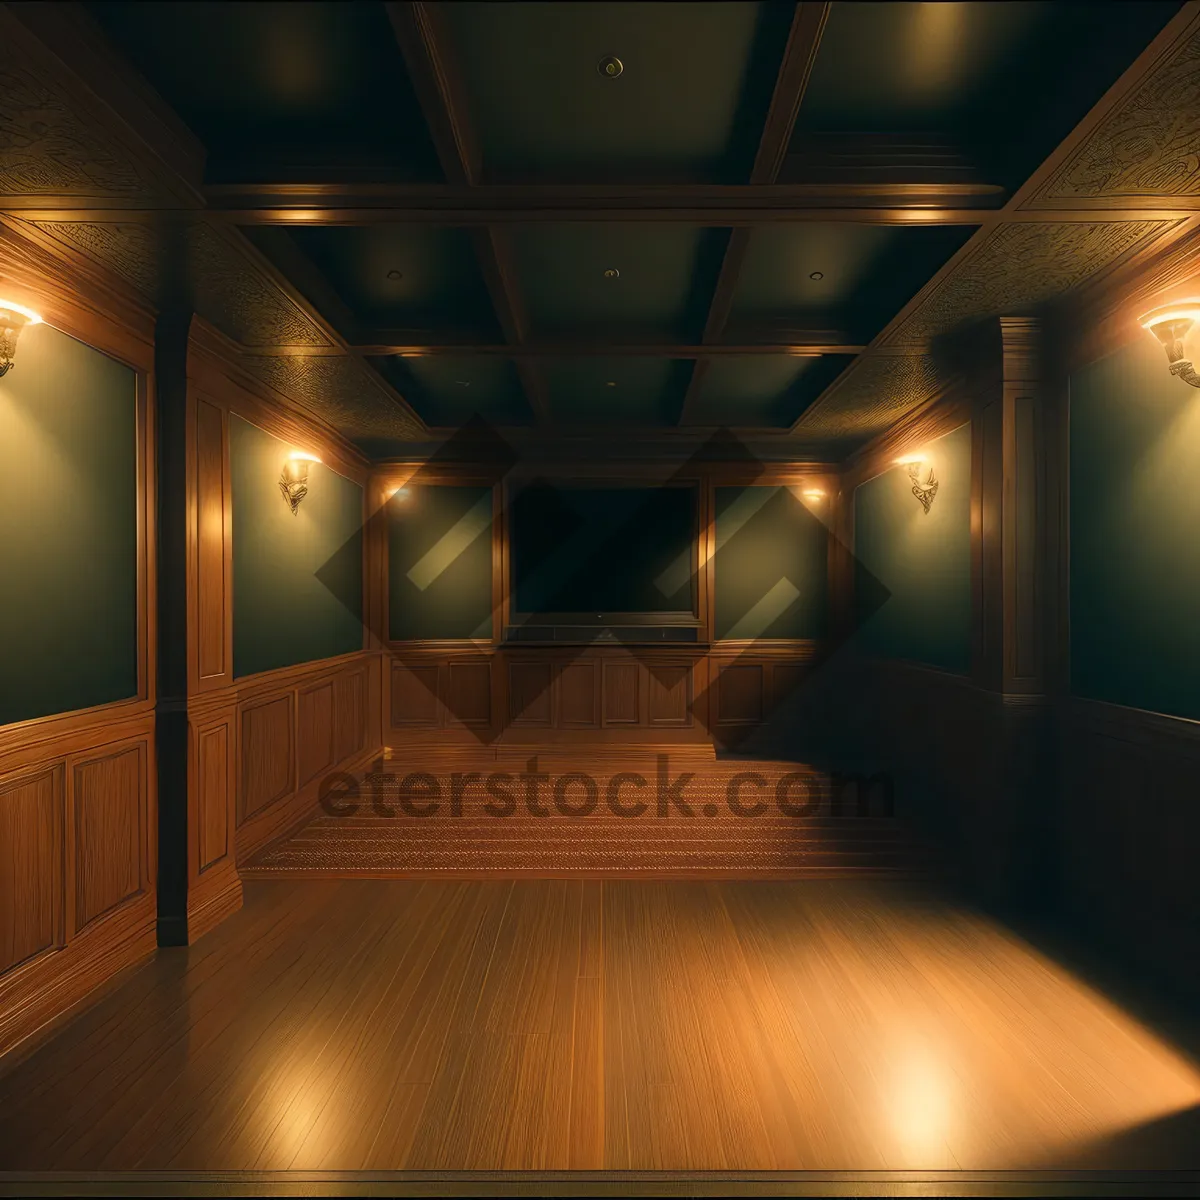 Picture of Modern and Luxurious Interior Hall with Wooden Parquet